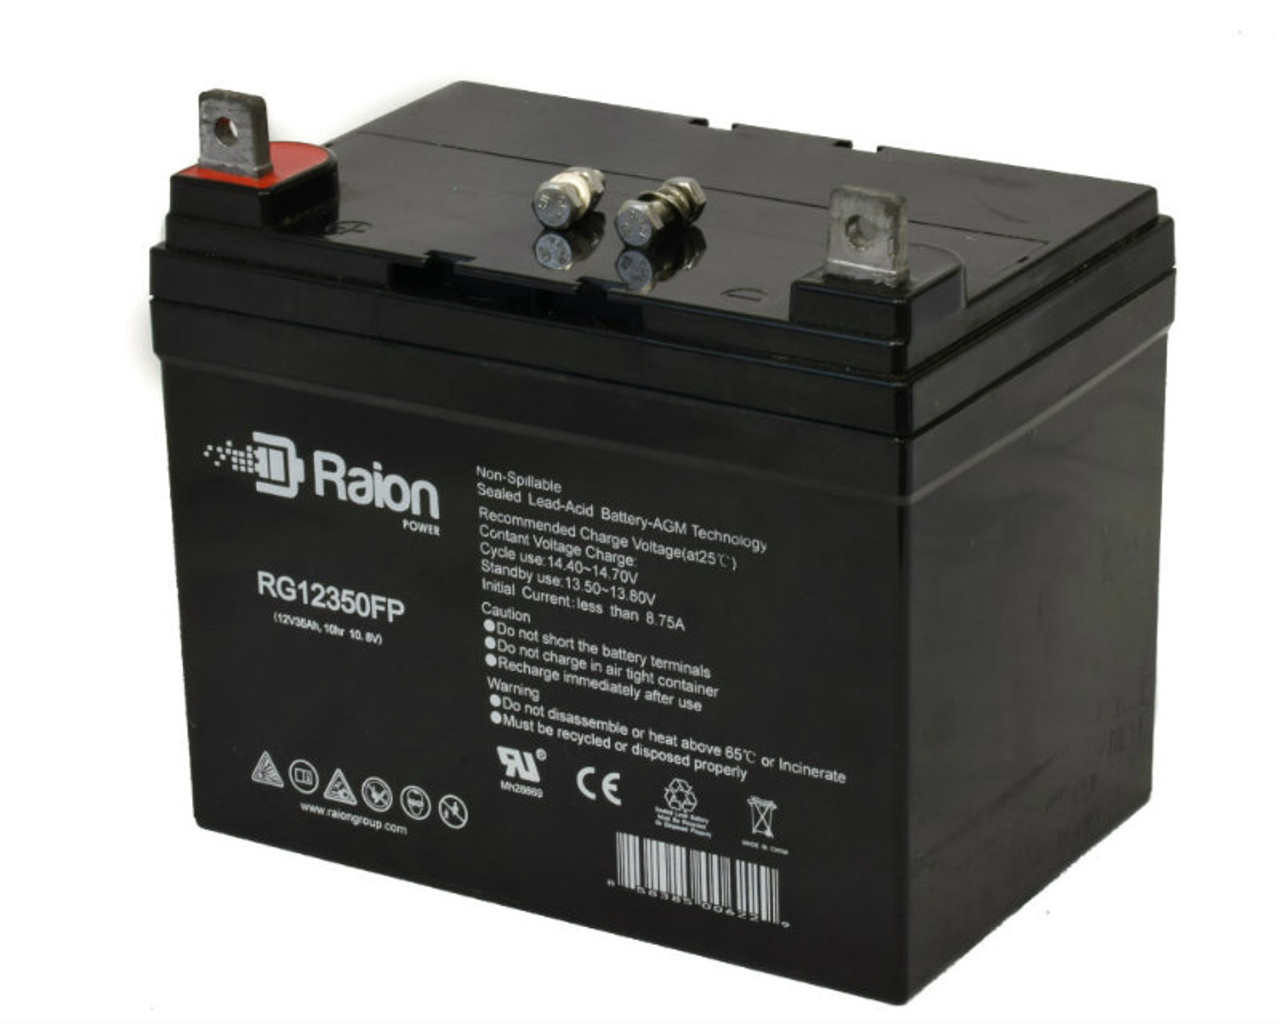 Raion Power Replacement 12V 35Ah RG12350FP Battery for SES BT35-12